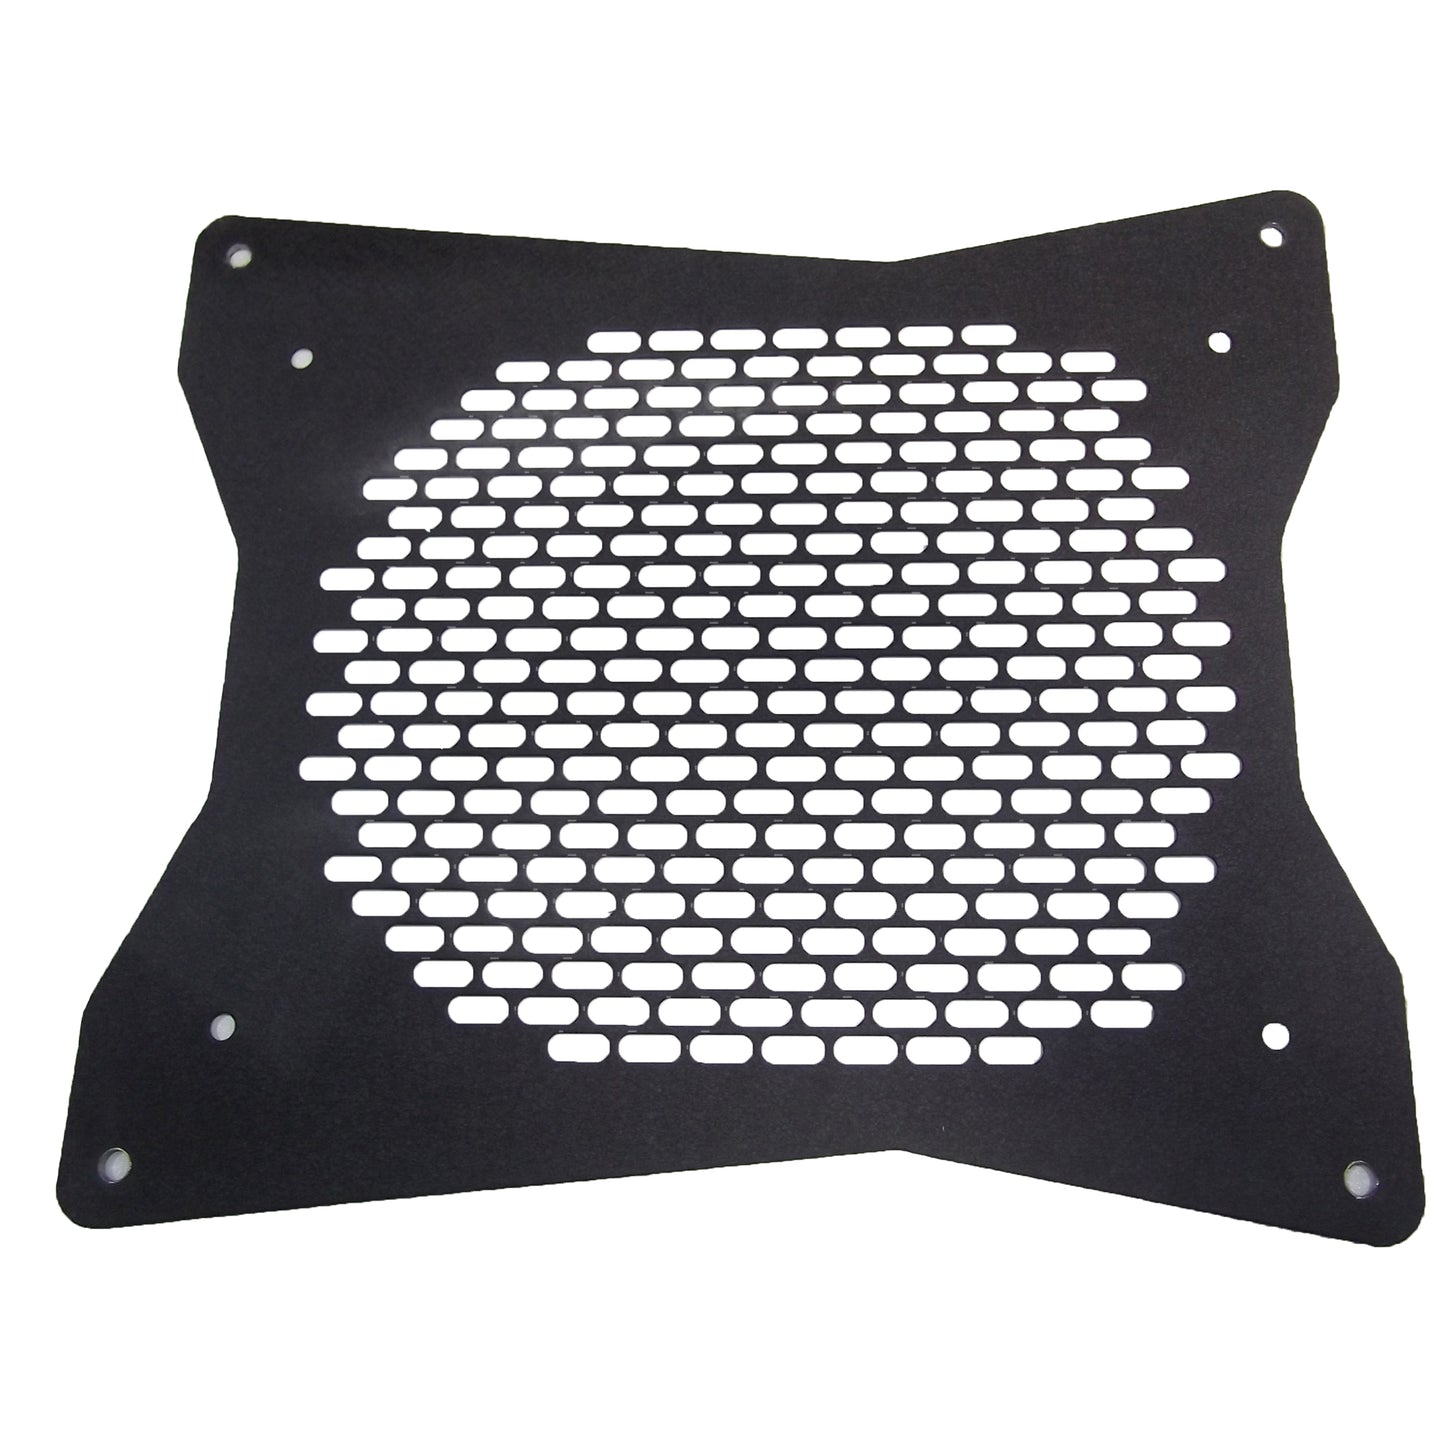 Air Outlet Grille Cover for XPOWER LGR Dehumidifiers